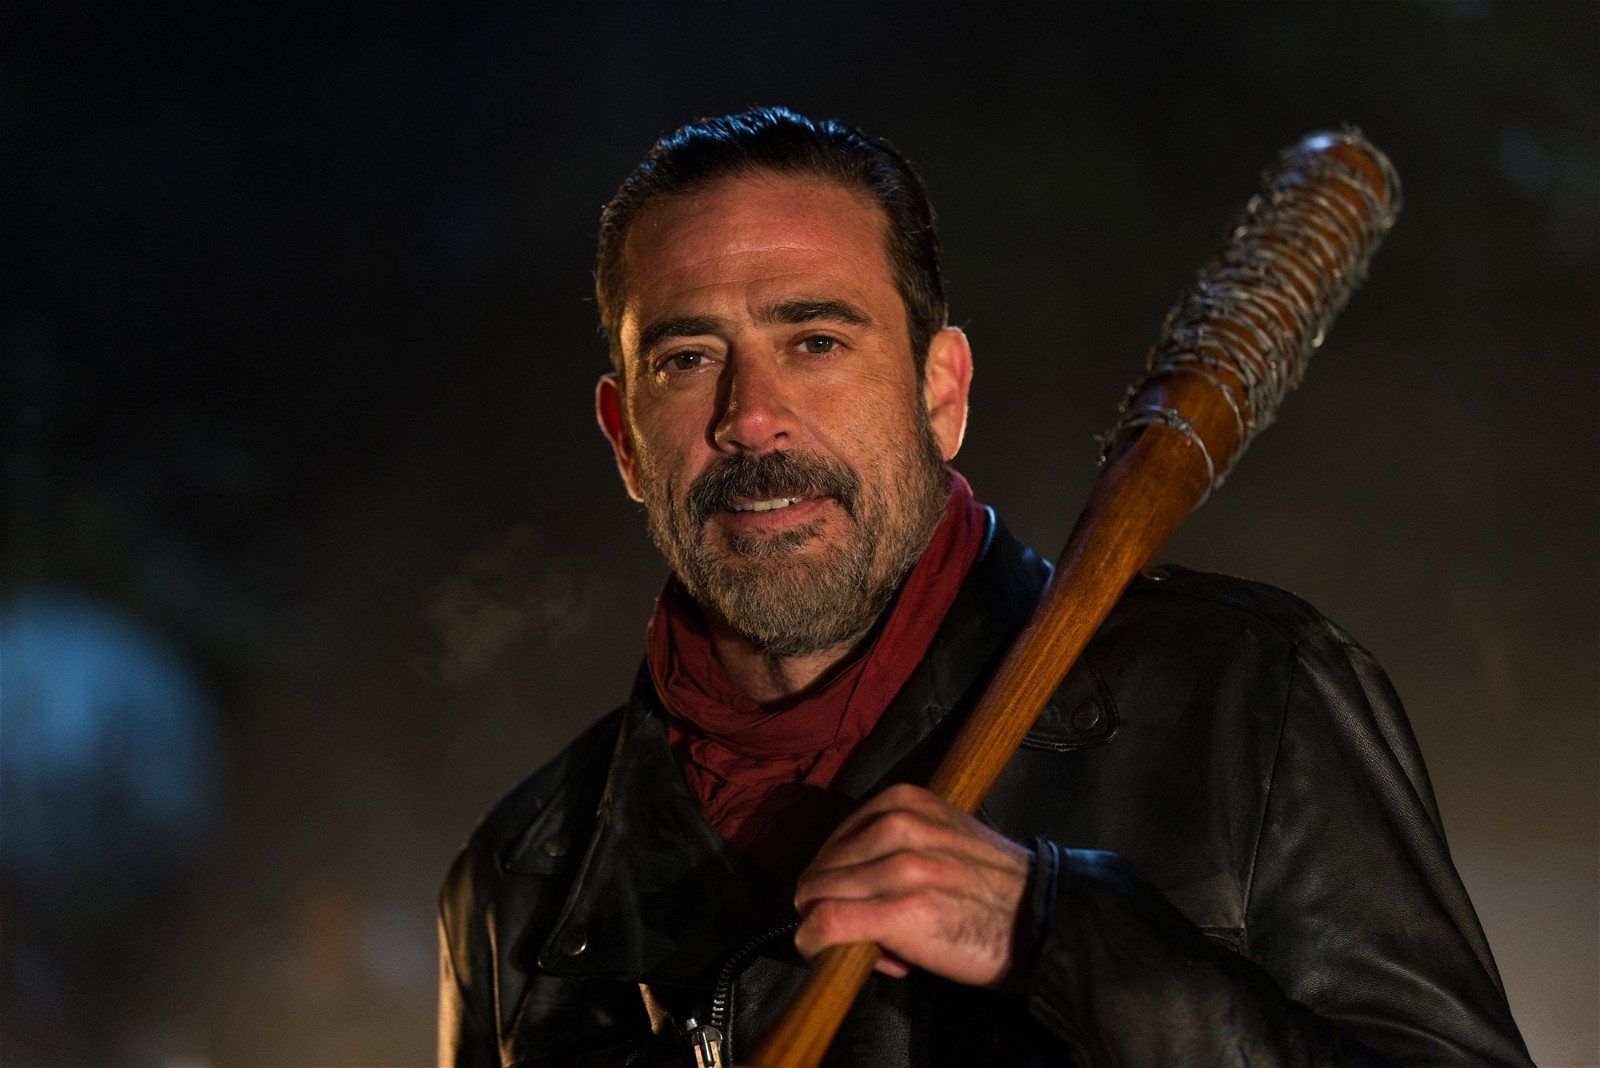 Negan with his weapon of choice, Lucille